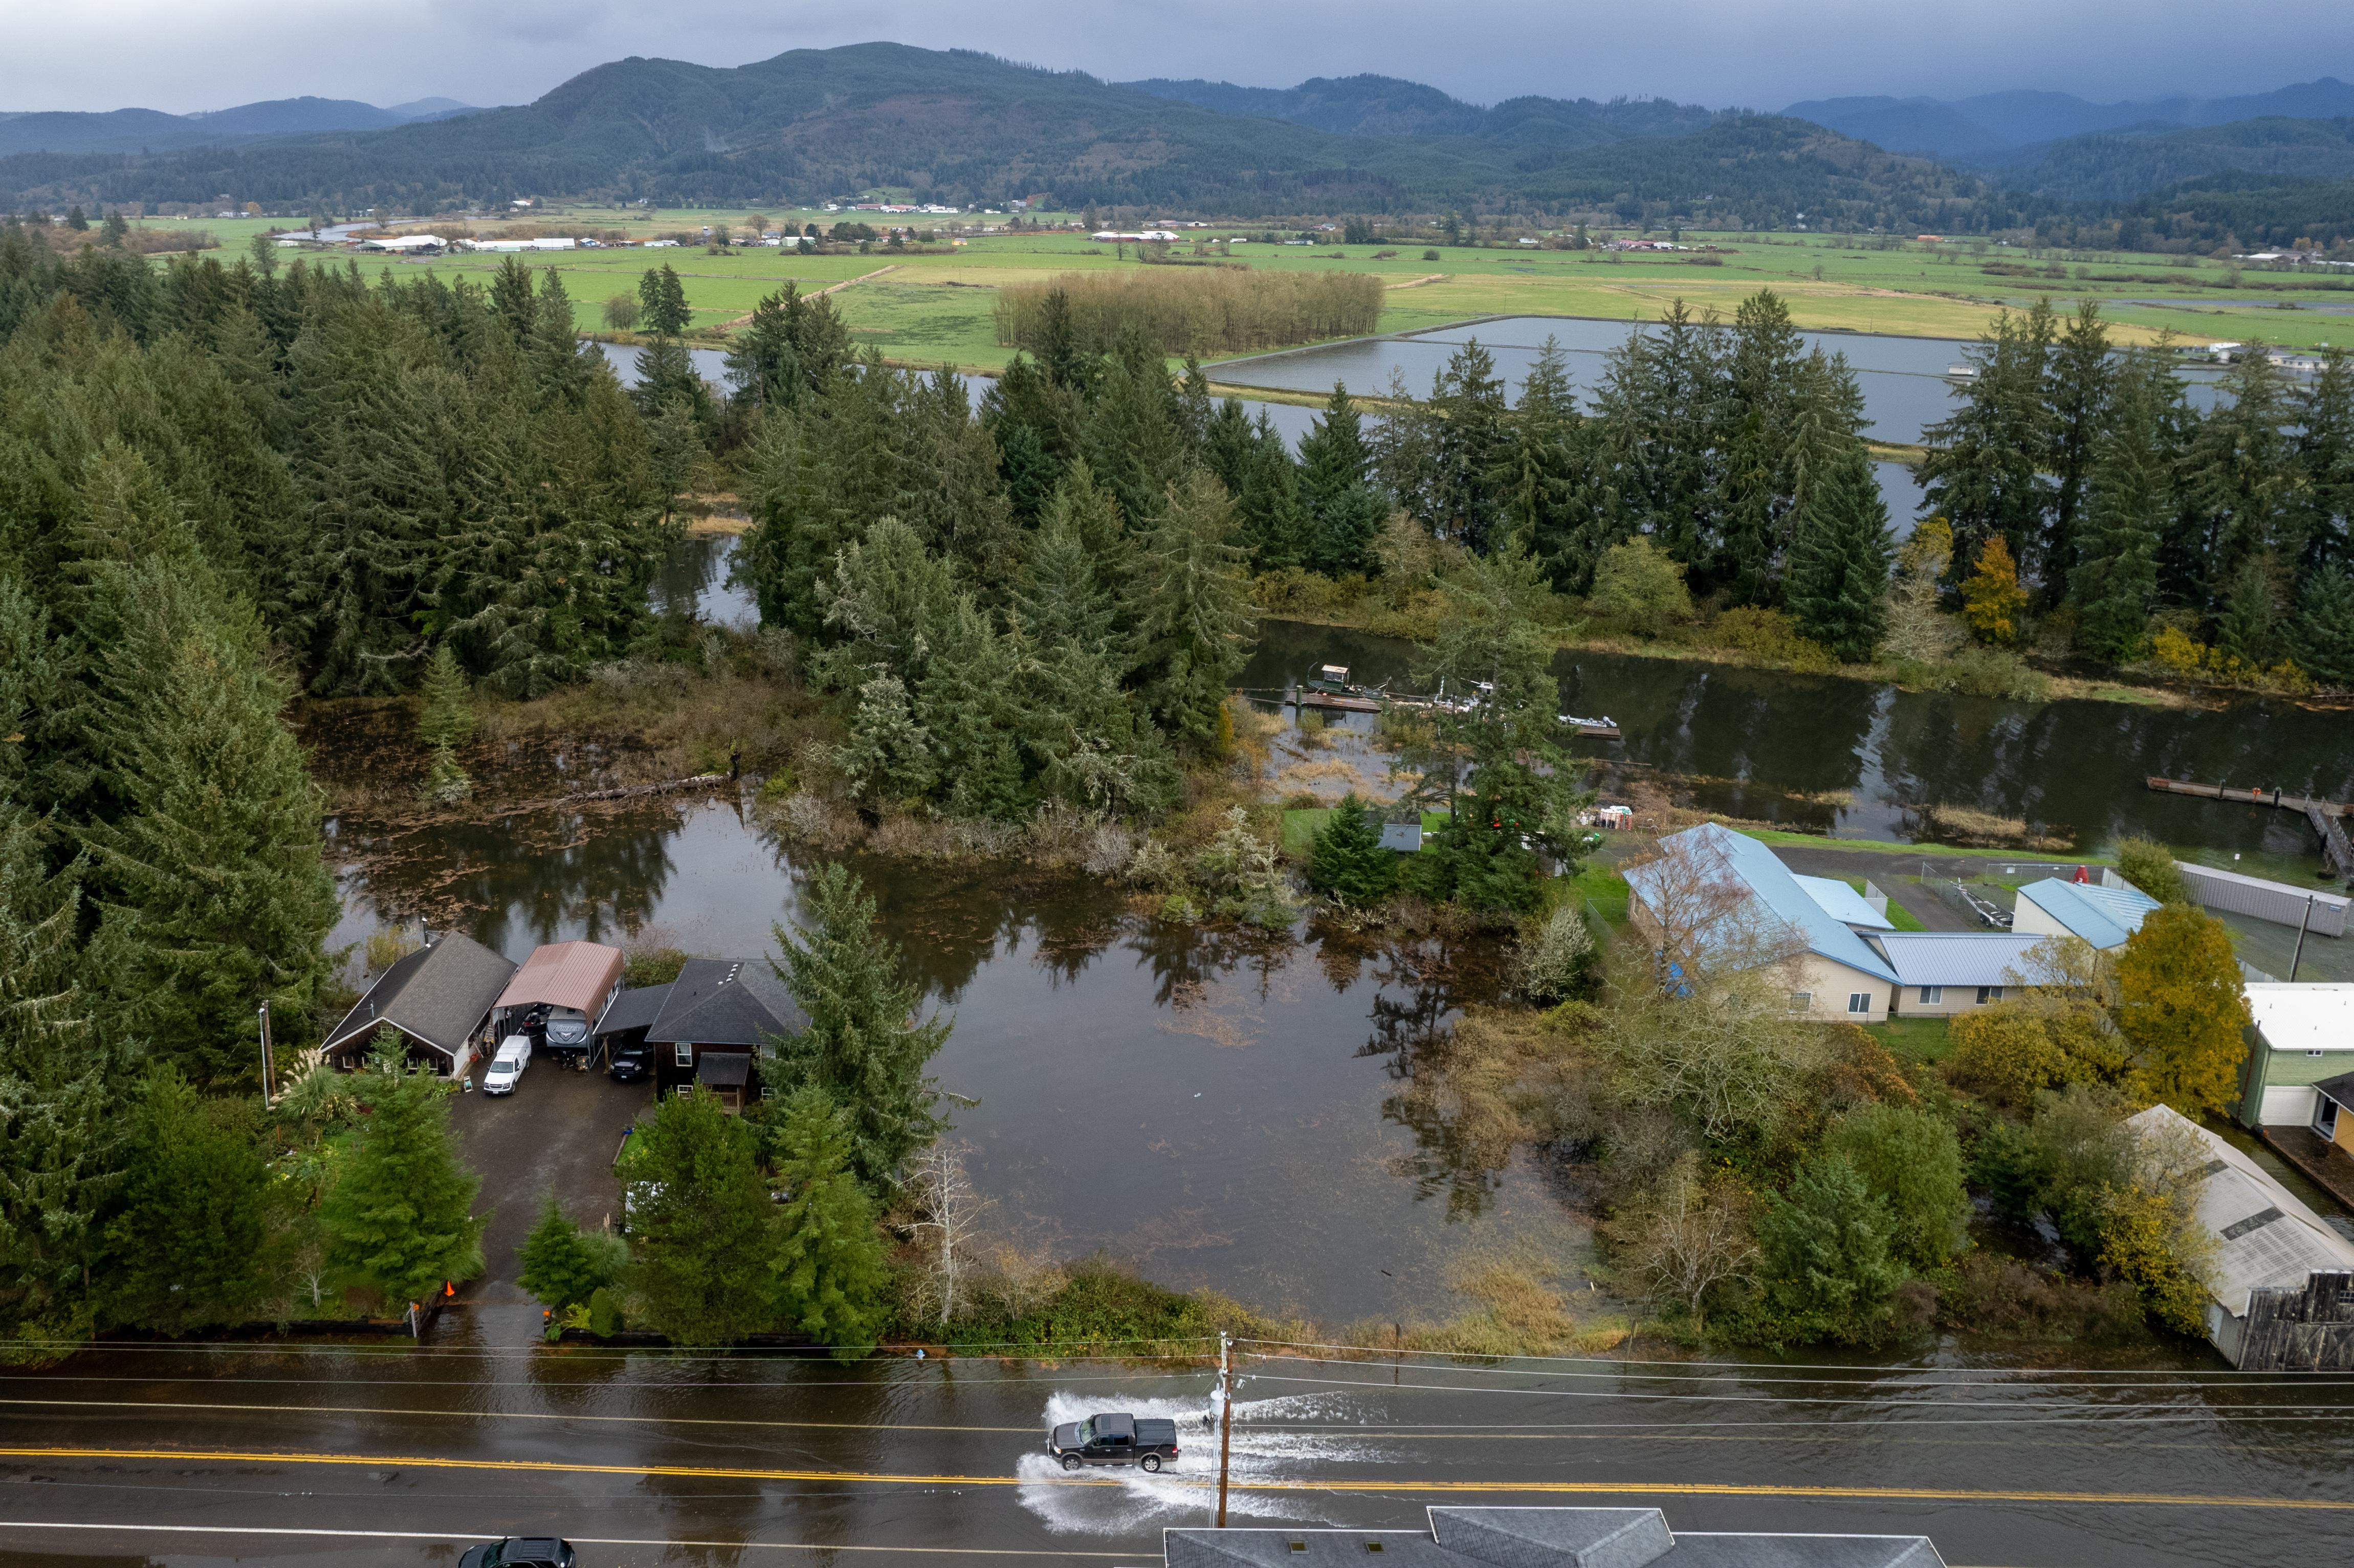 Vehicles were wading to get through the intersection of highway 101 and 7th Street. Taken at the peak of the King Tide Saturday Nov. 6, 2021.